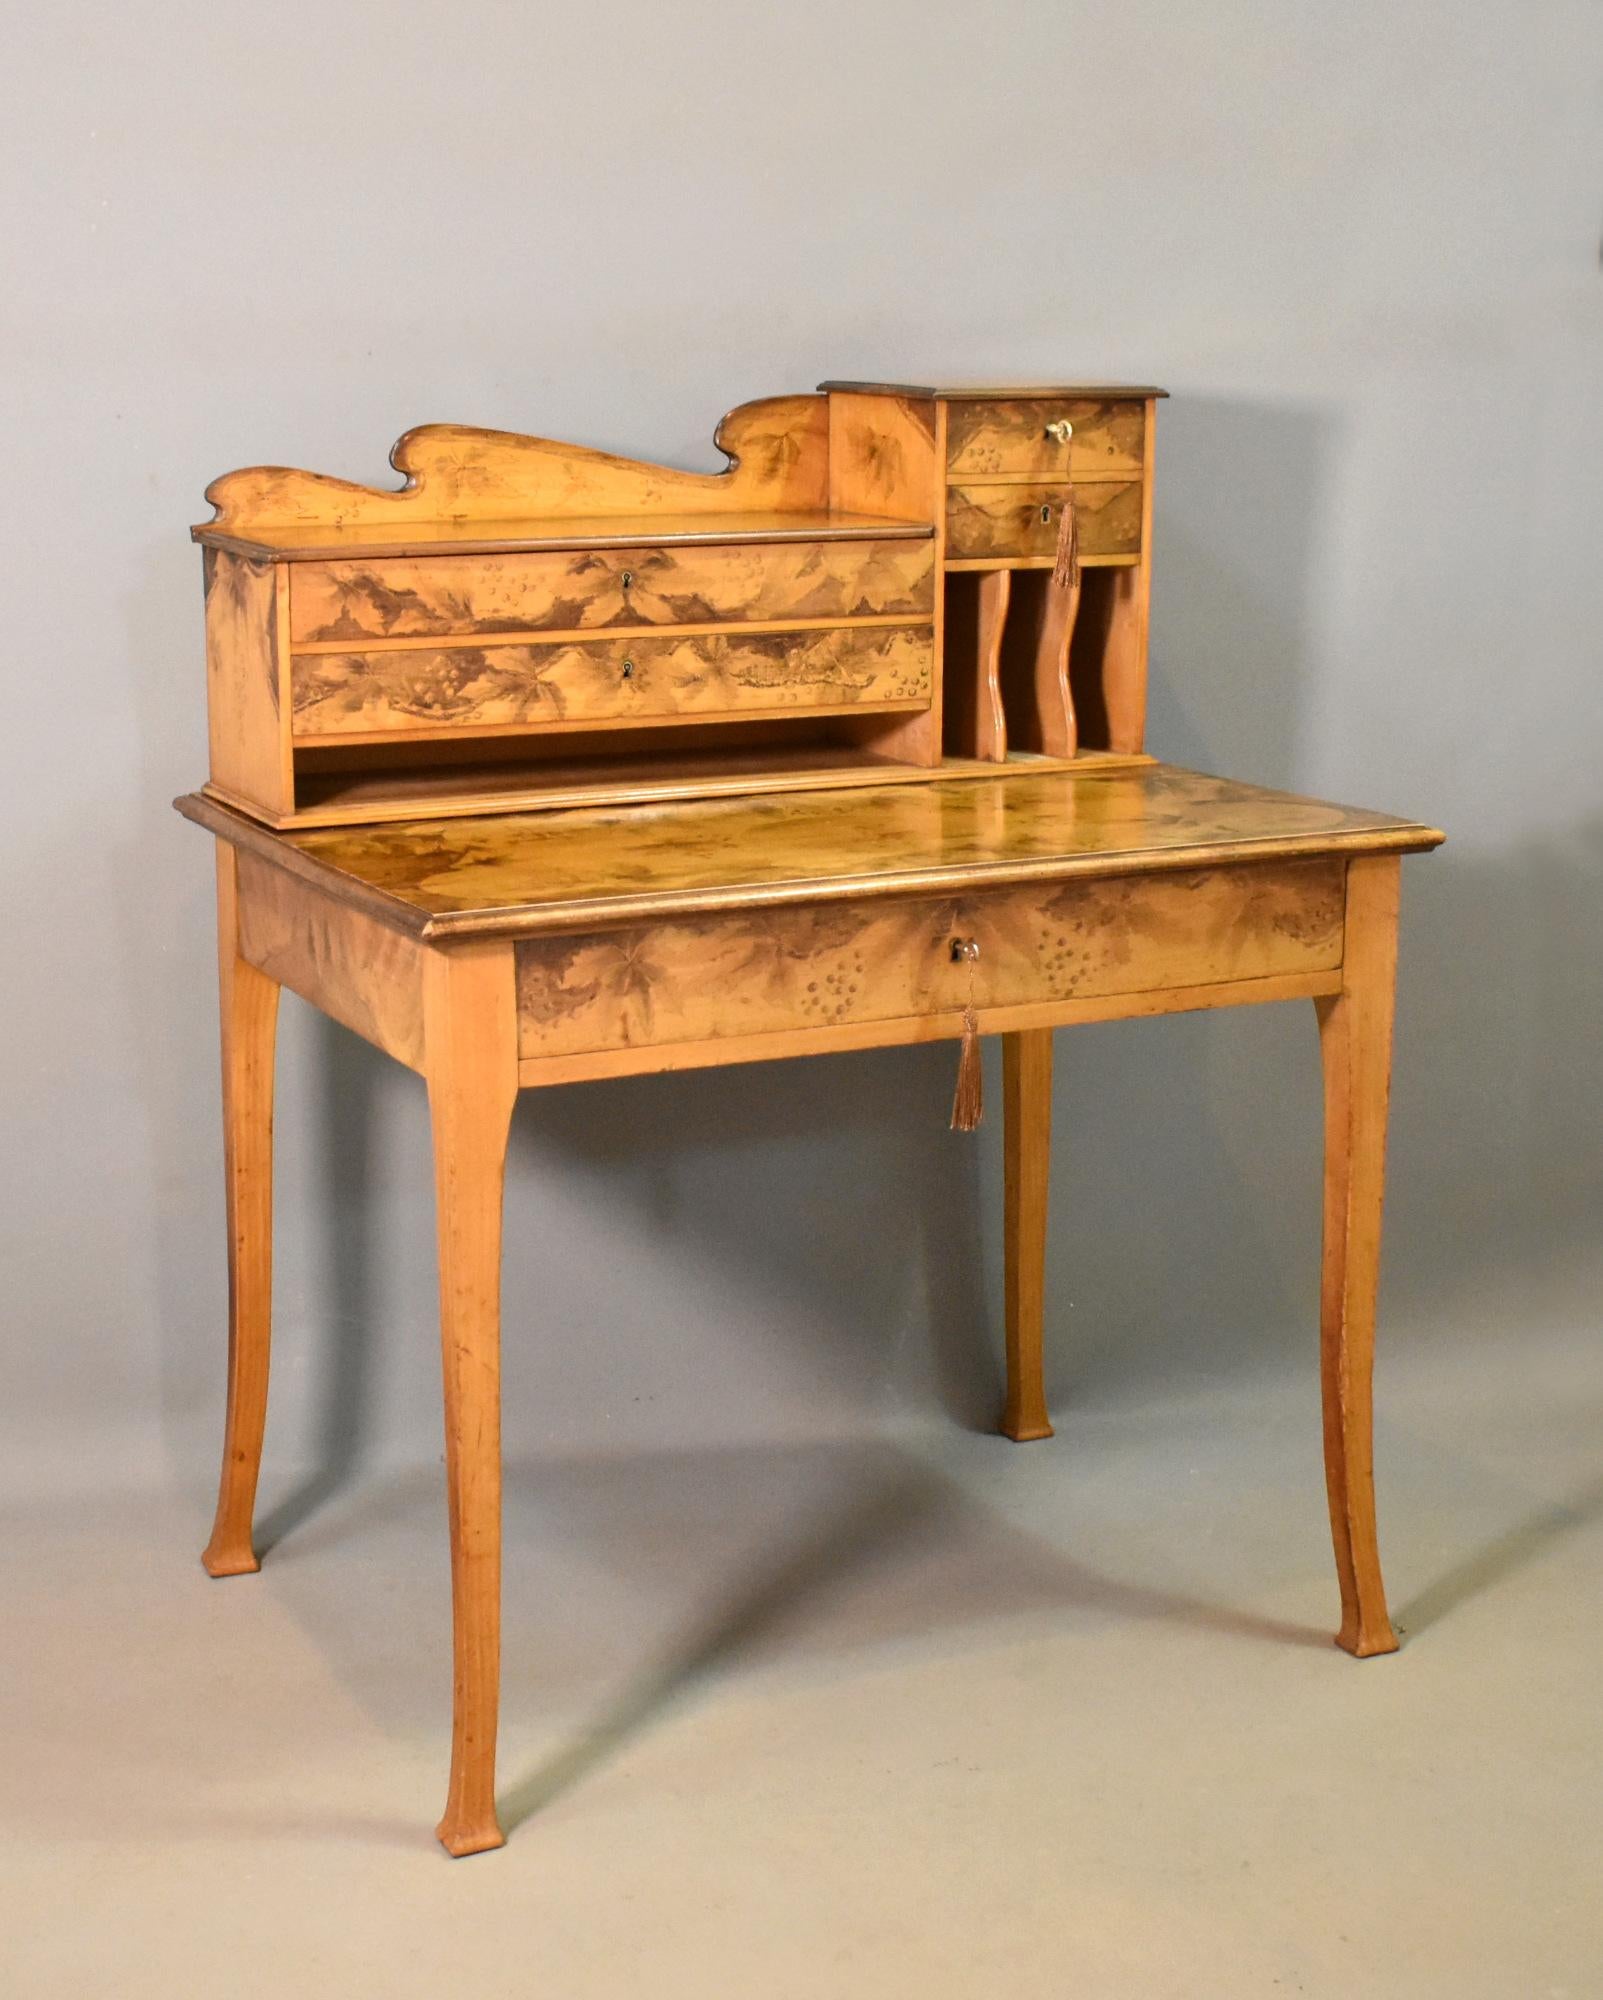 French Art Nouveau Tiered Pyrography Etched Desk For Sale